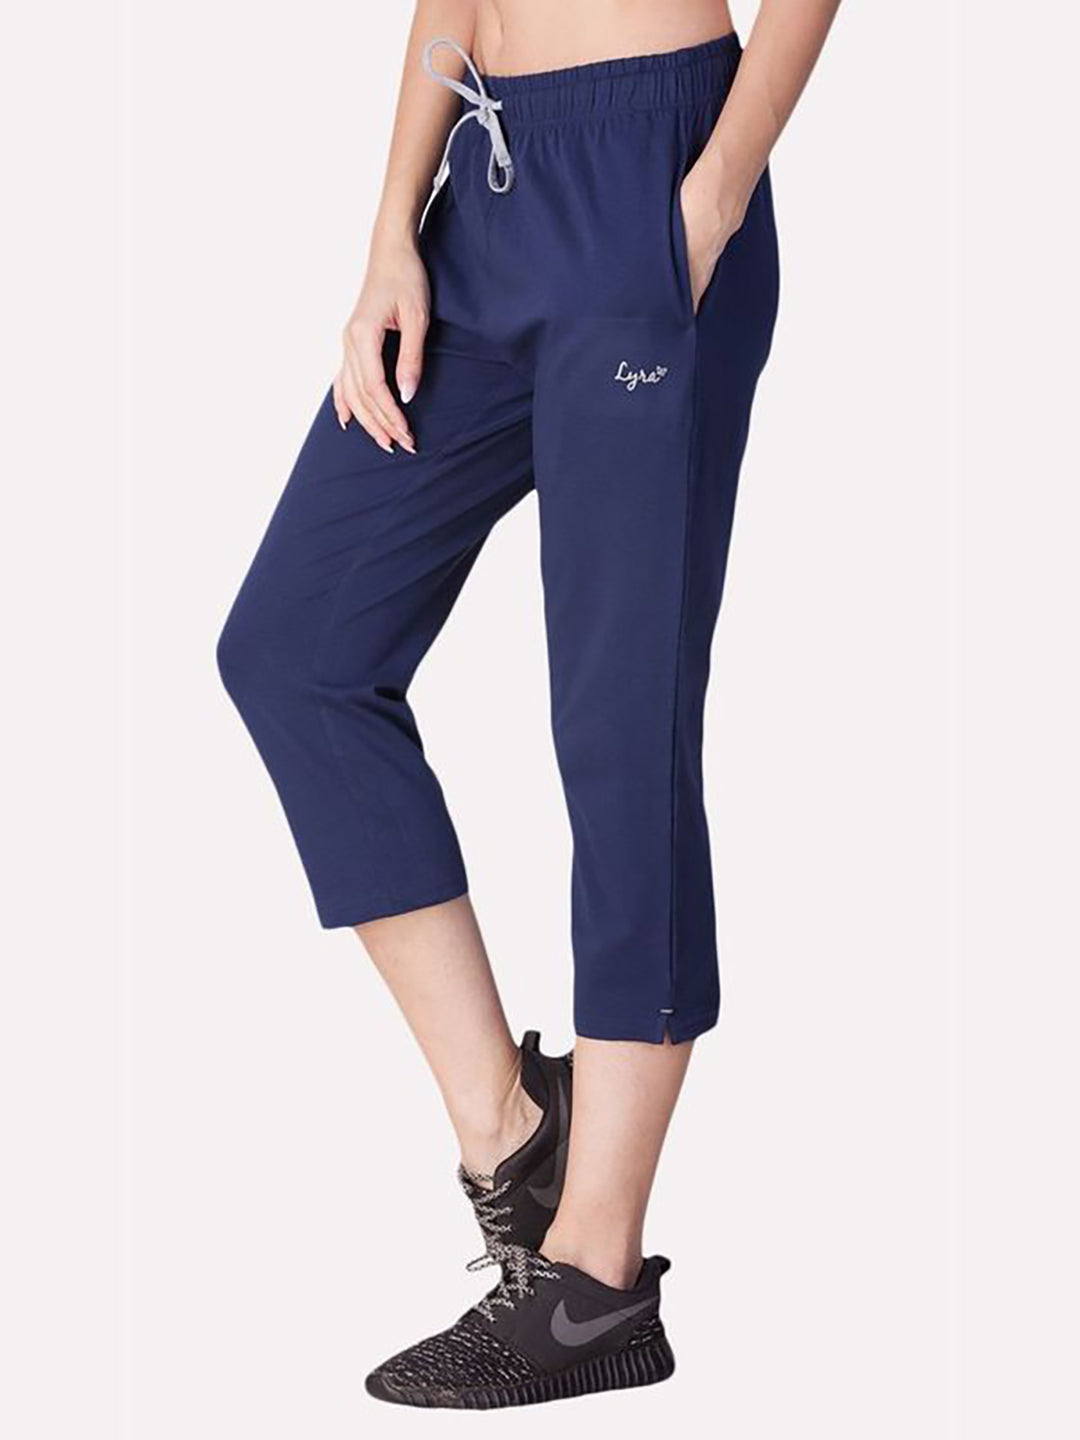 Lyra Track Pant (302, XL-XXL) in Bangalore at best price by Hifza Fashions  - Justdial